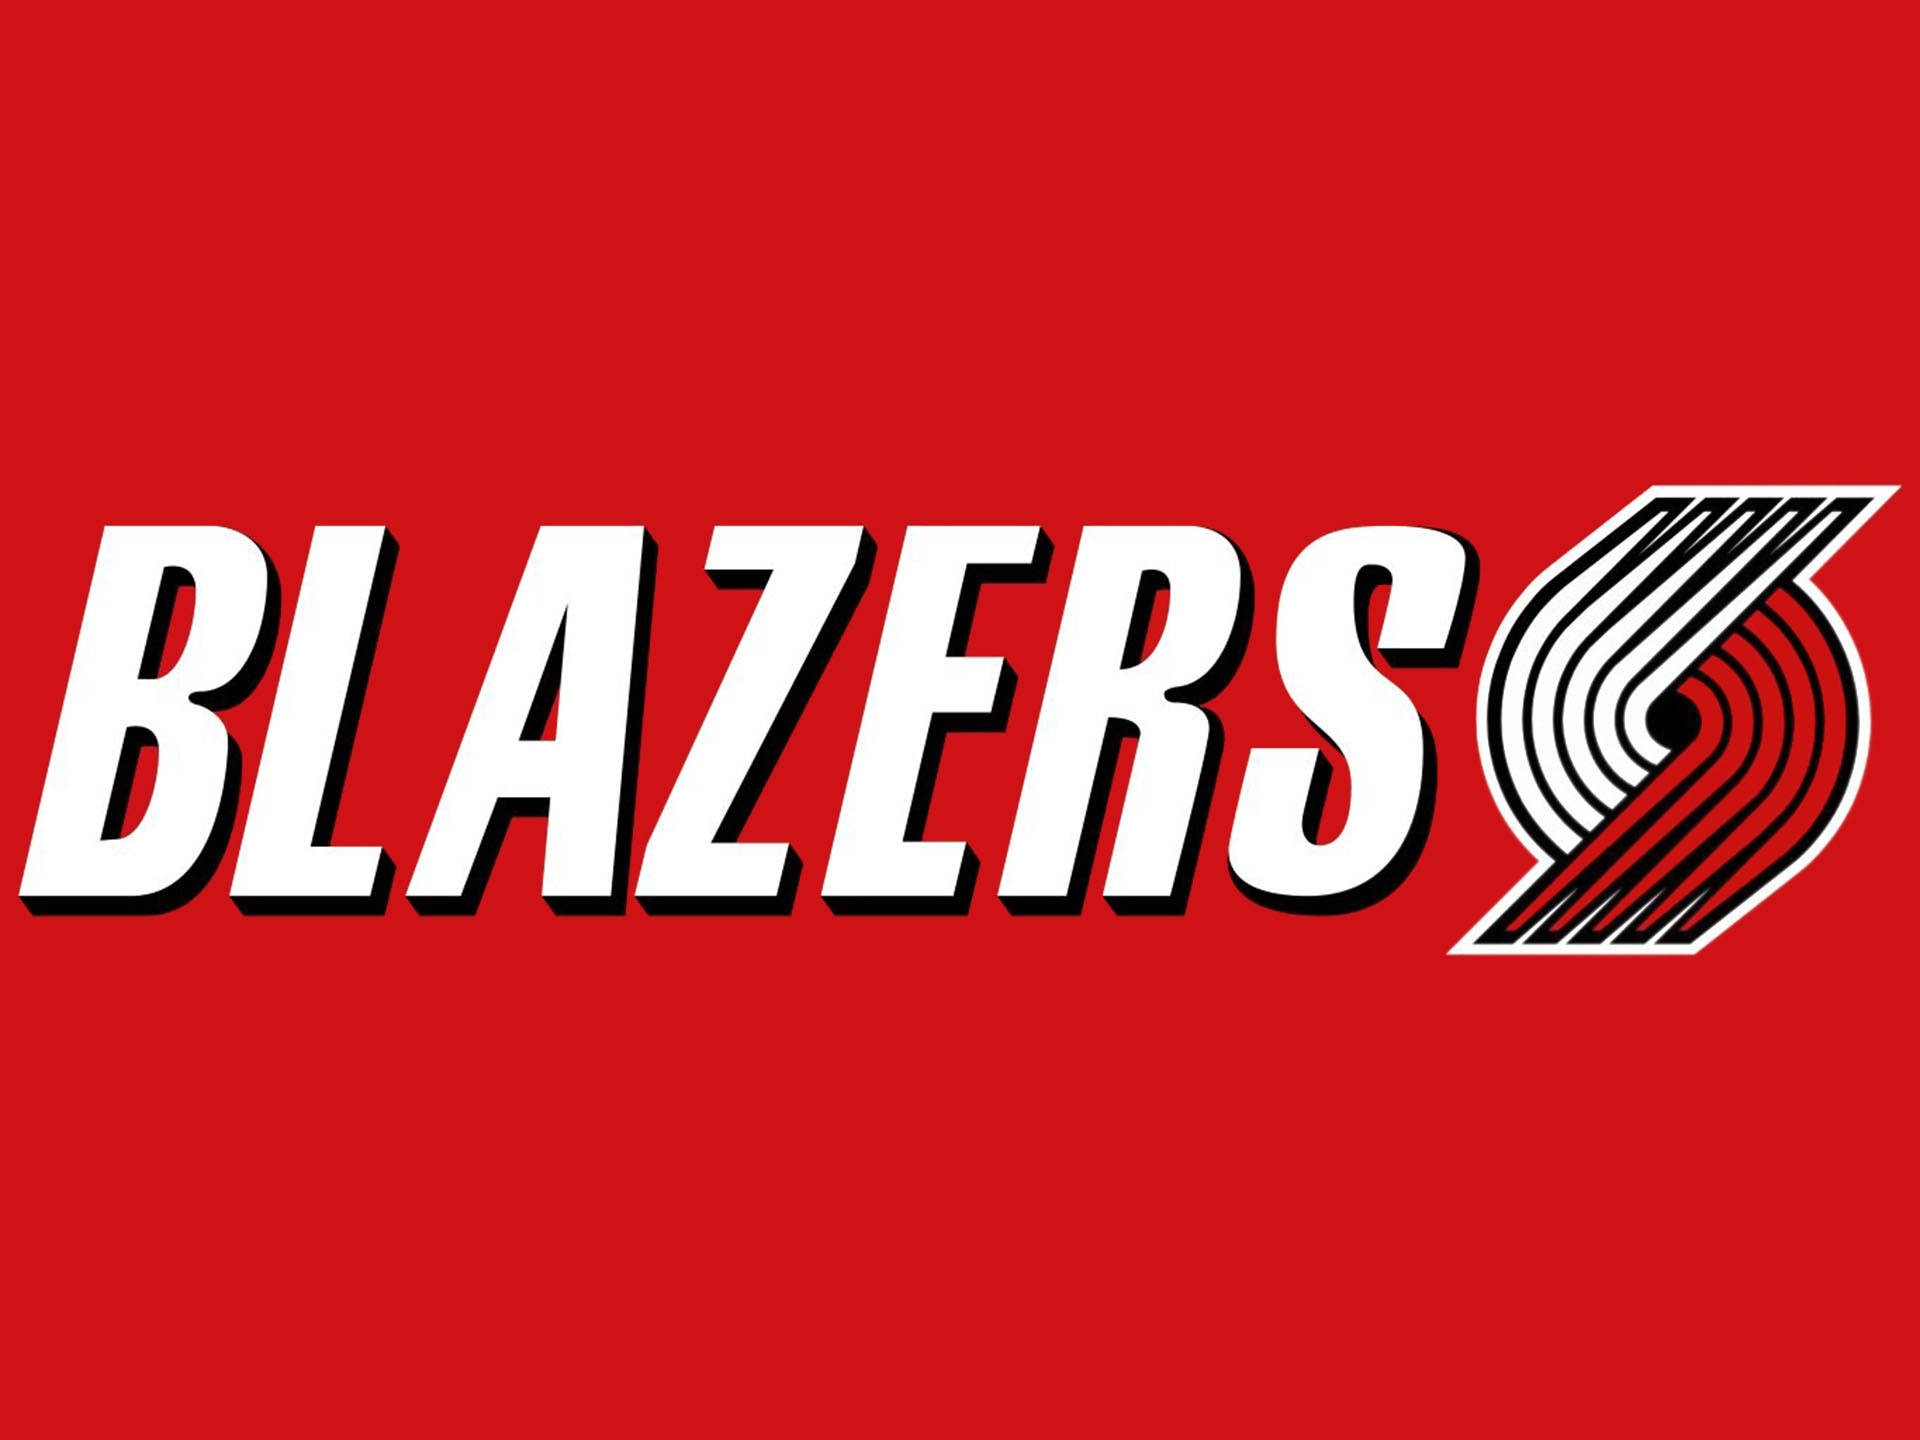 The Noble Logo Of The Portland Trail Blazers Team On A Dynamic Background In Red.